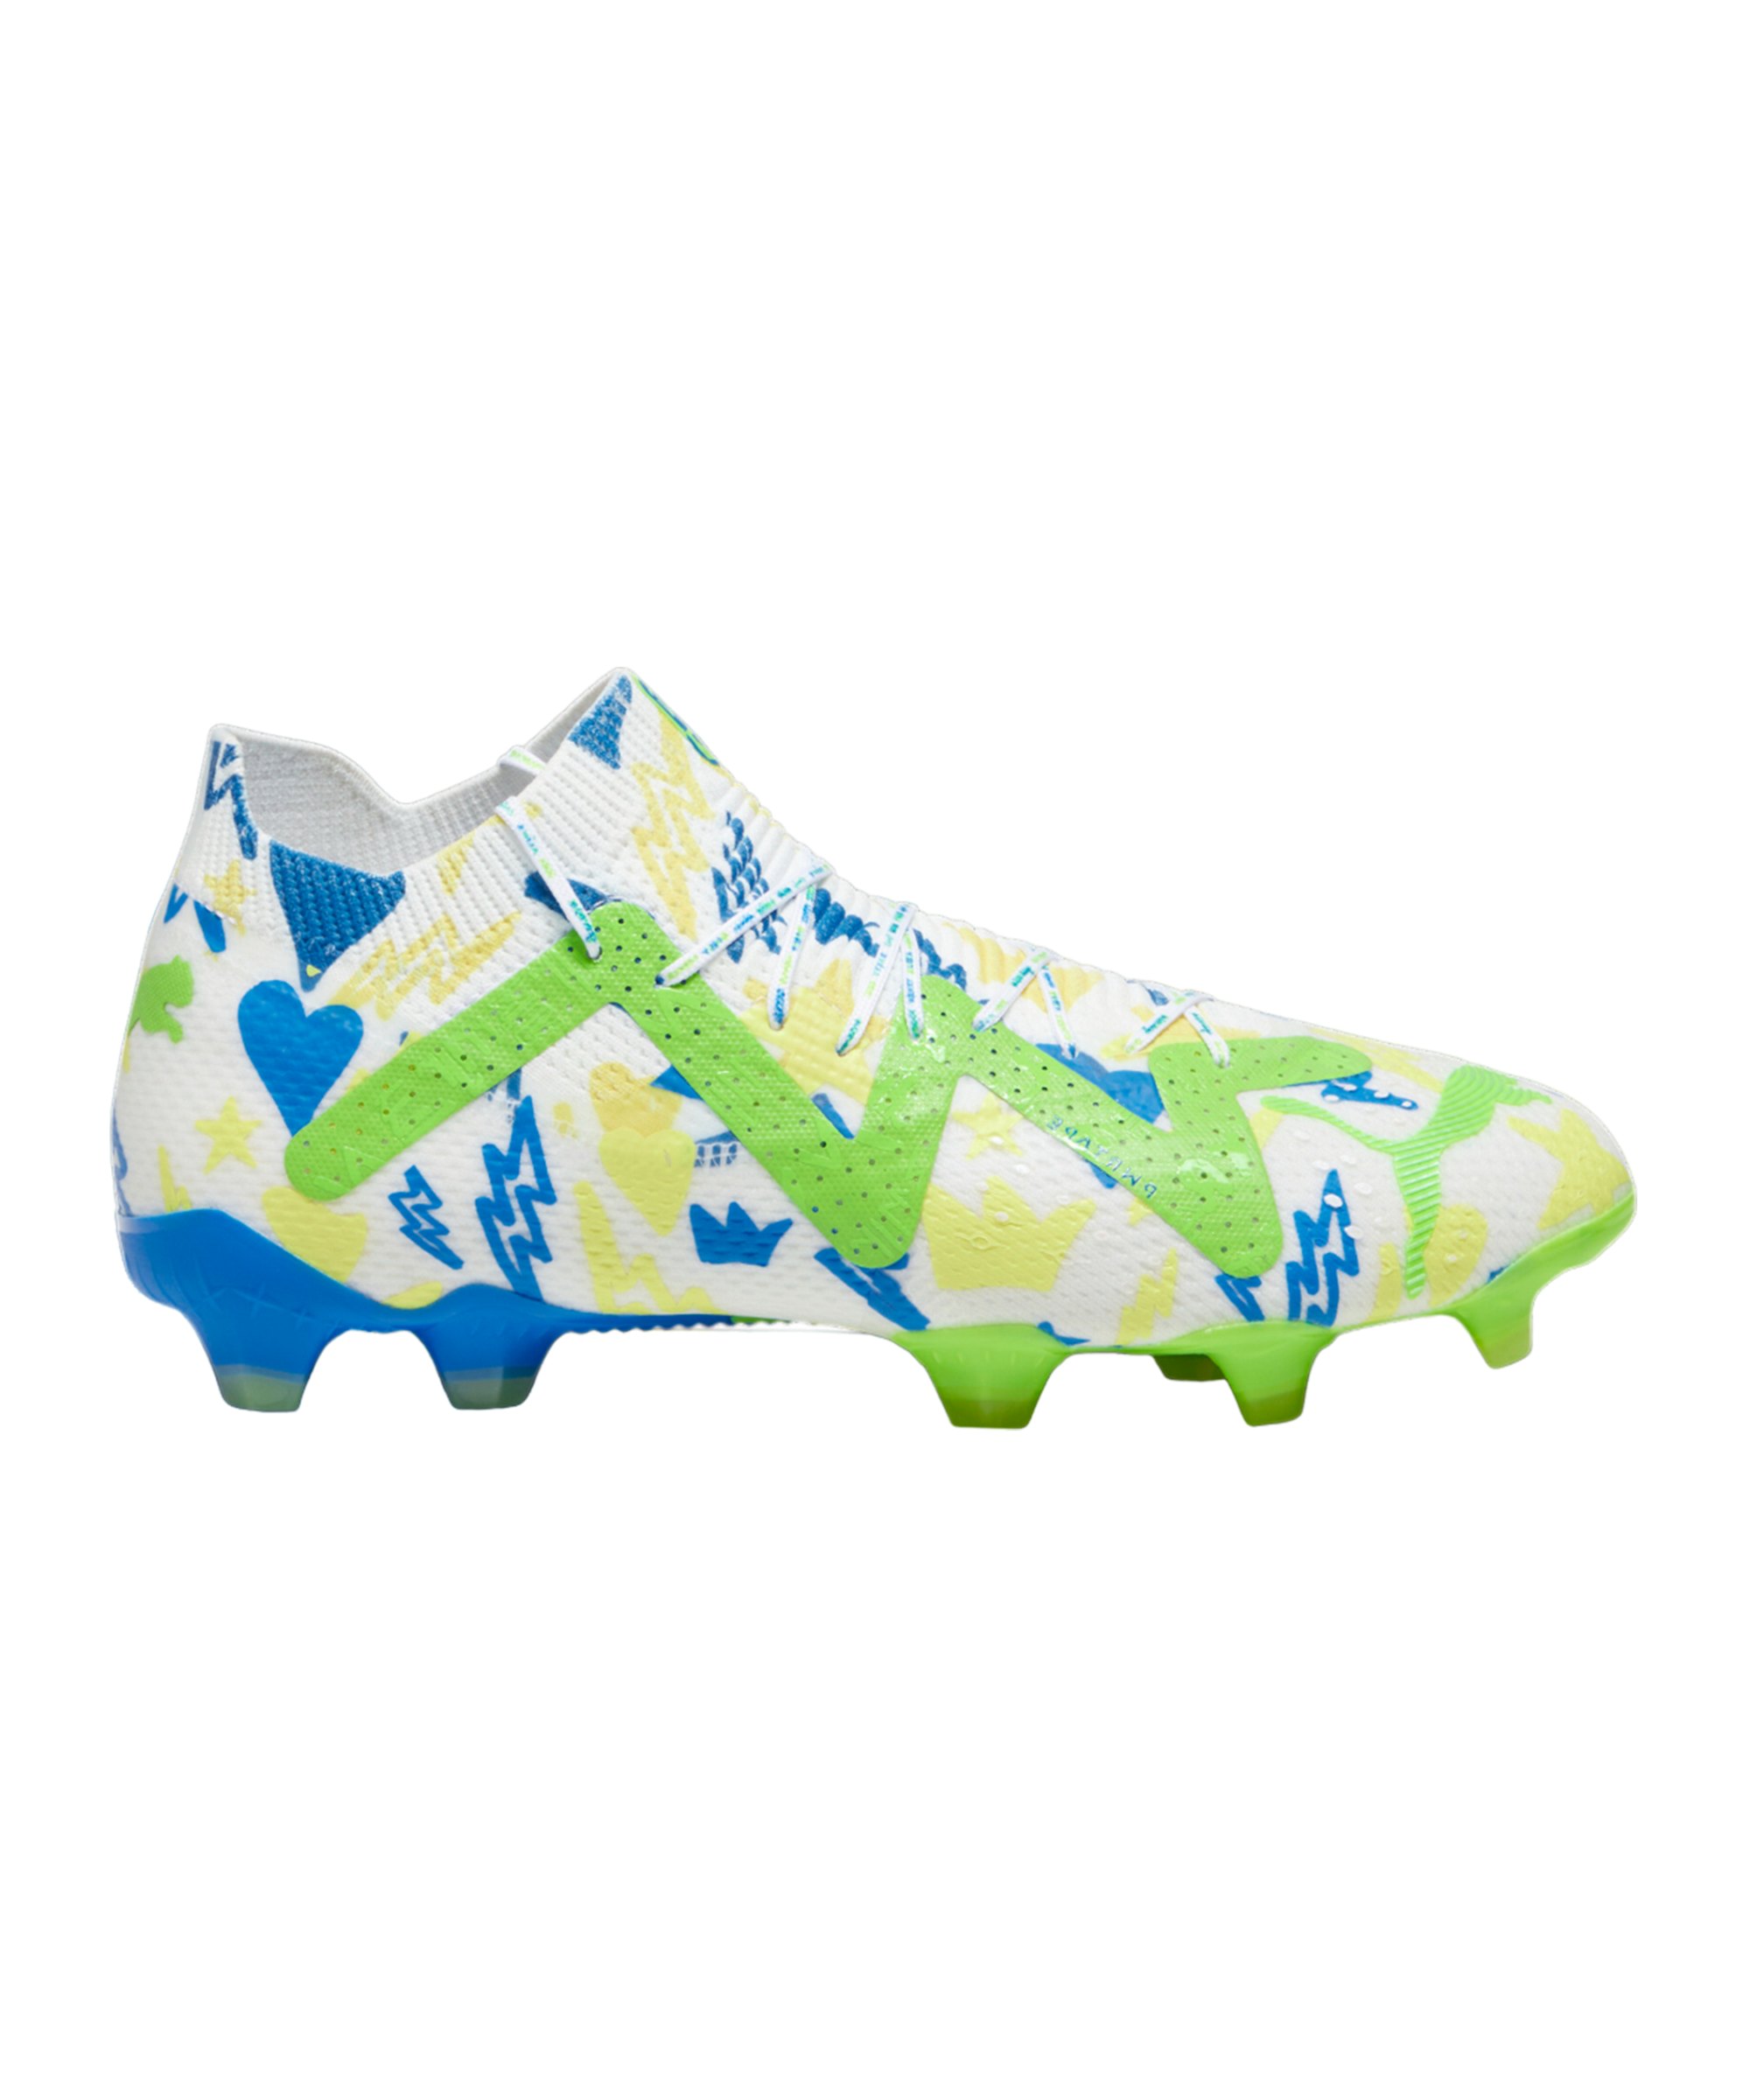 PUMA FUTURE Ultimate FG/AG NJR Institute Weiss weiss